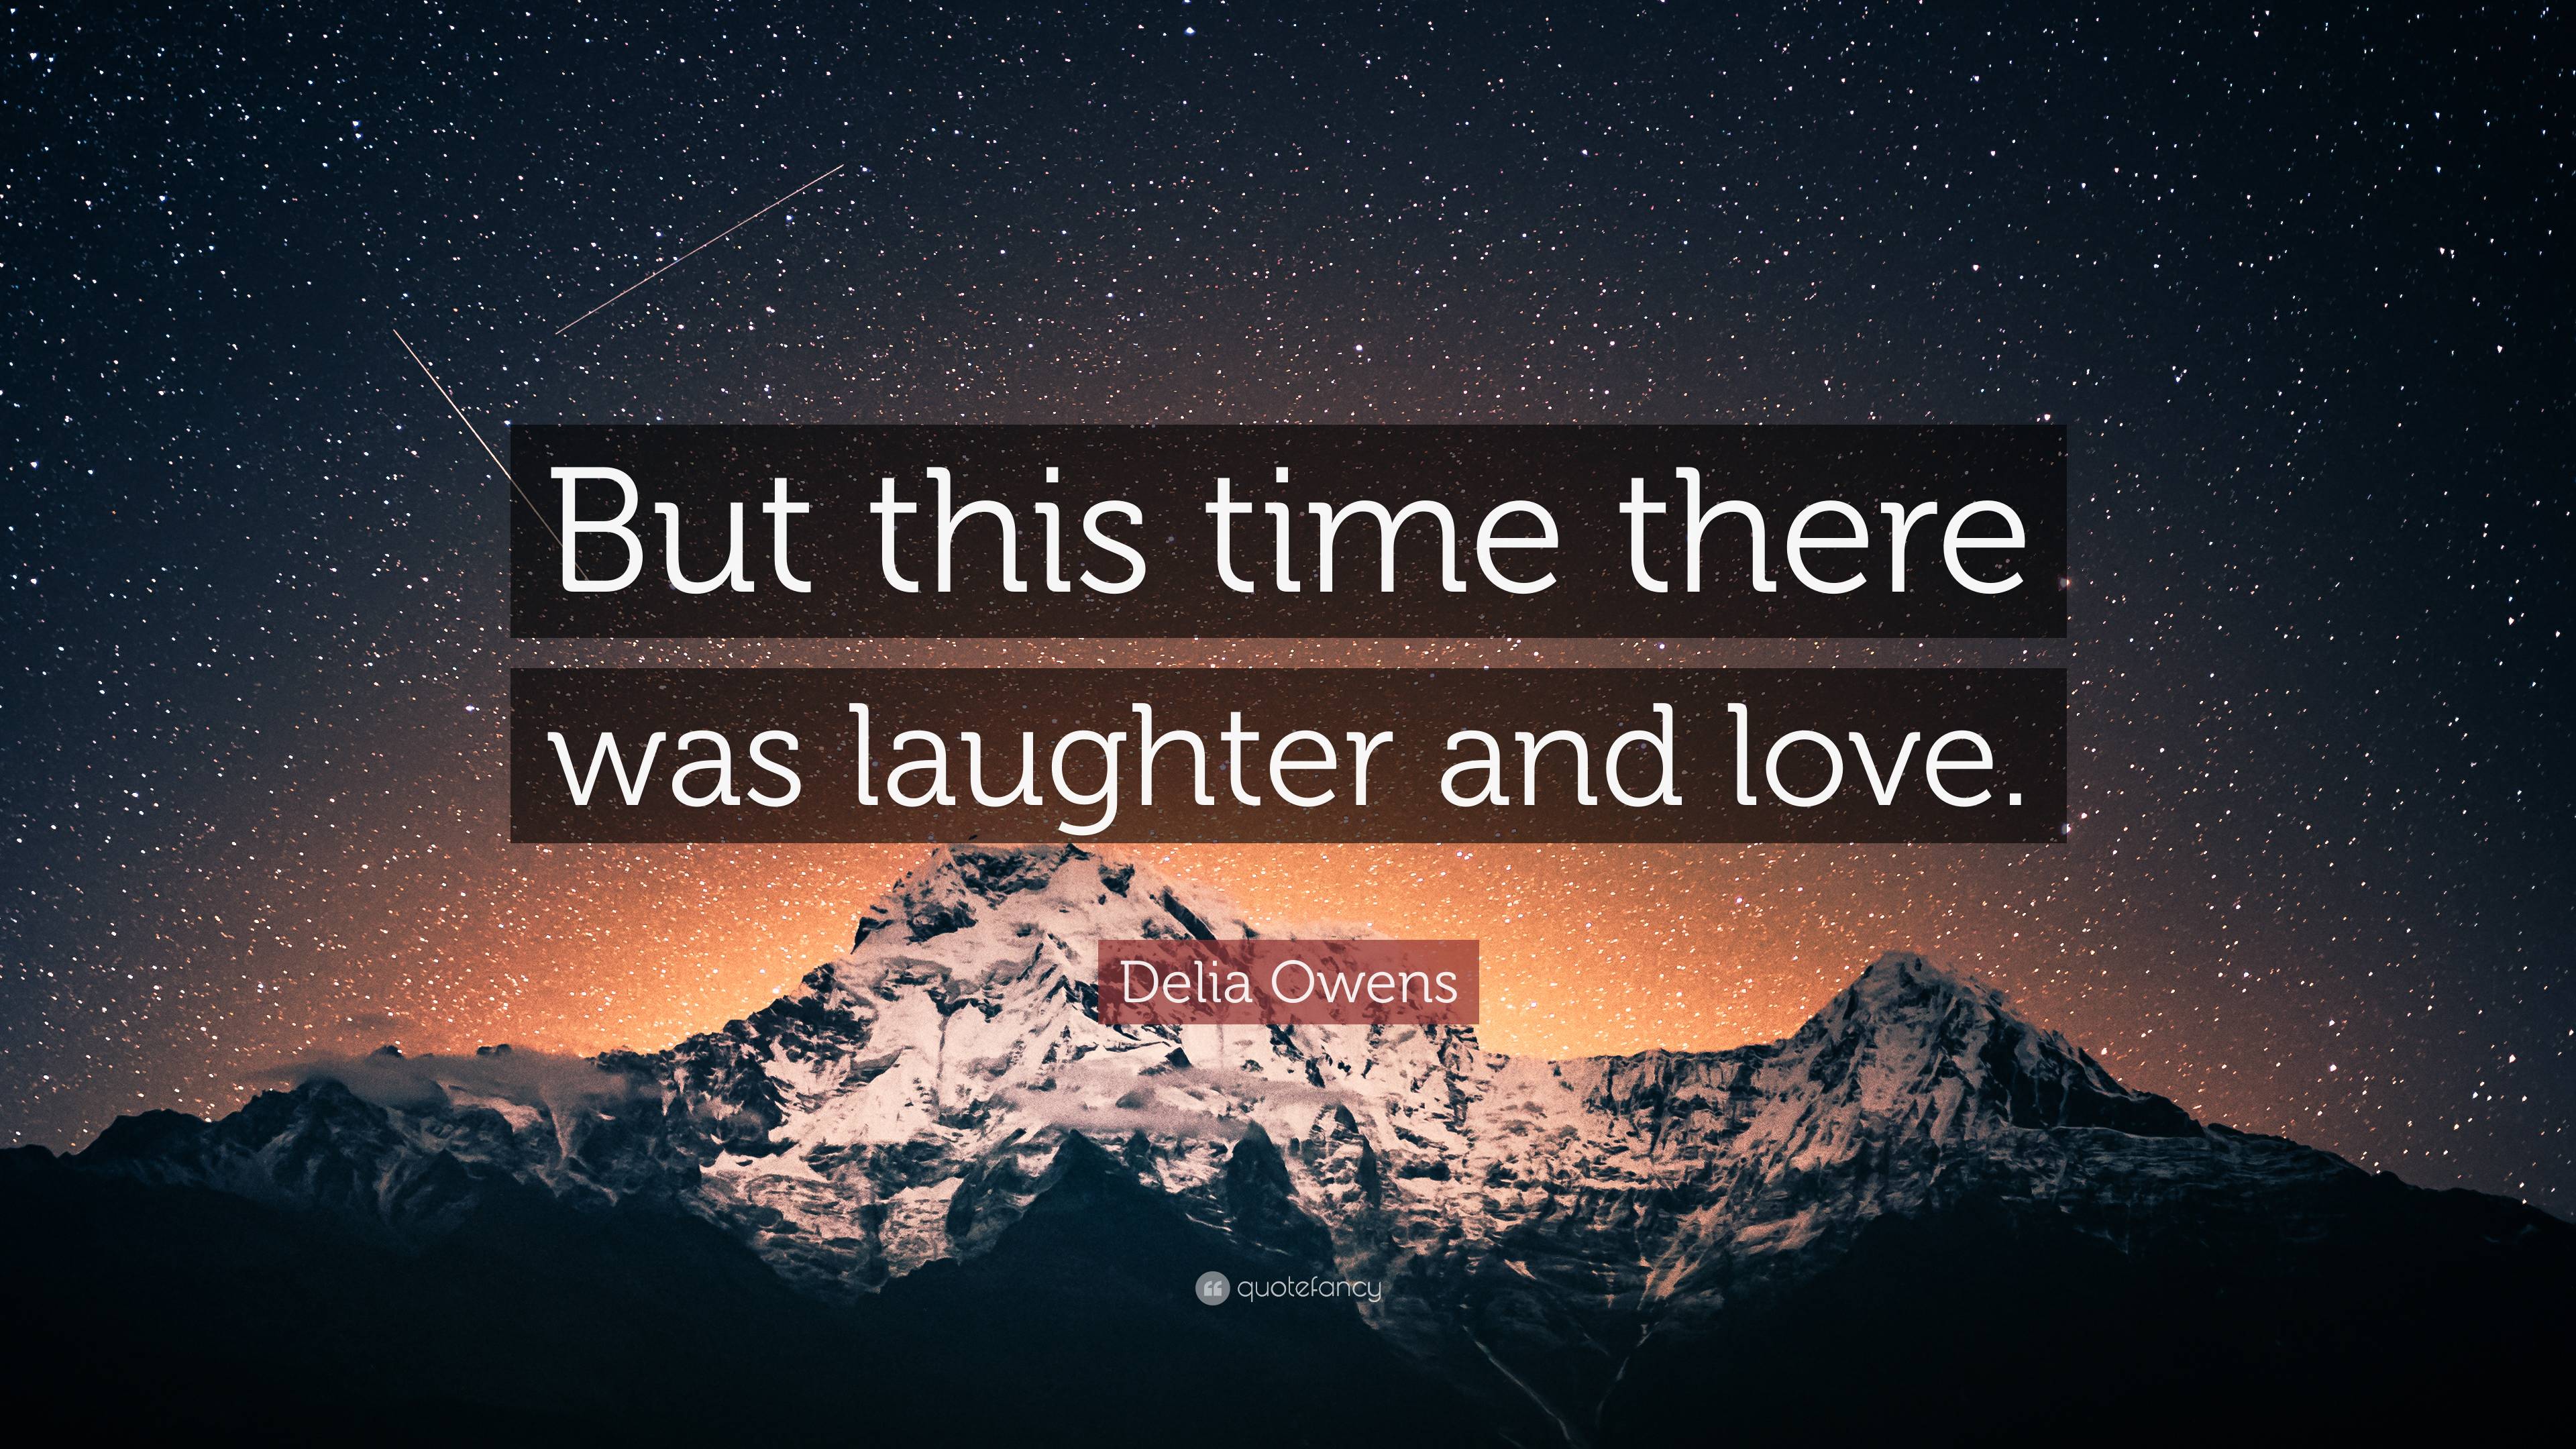 Delia Owens Quote: “But this time there was laughter and love.”